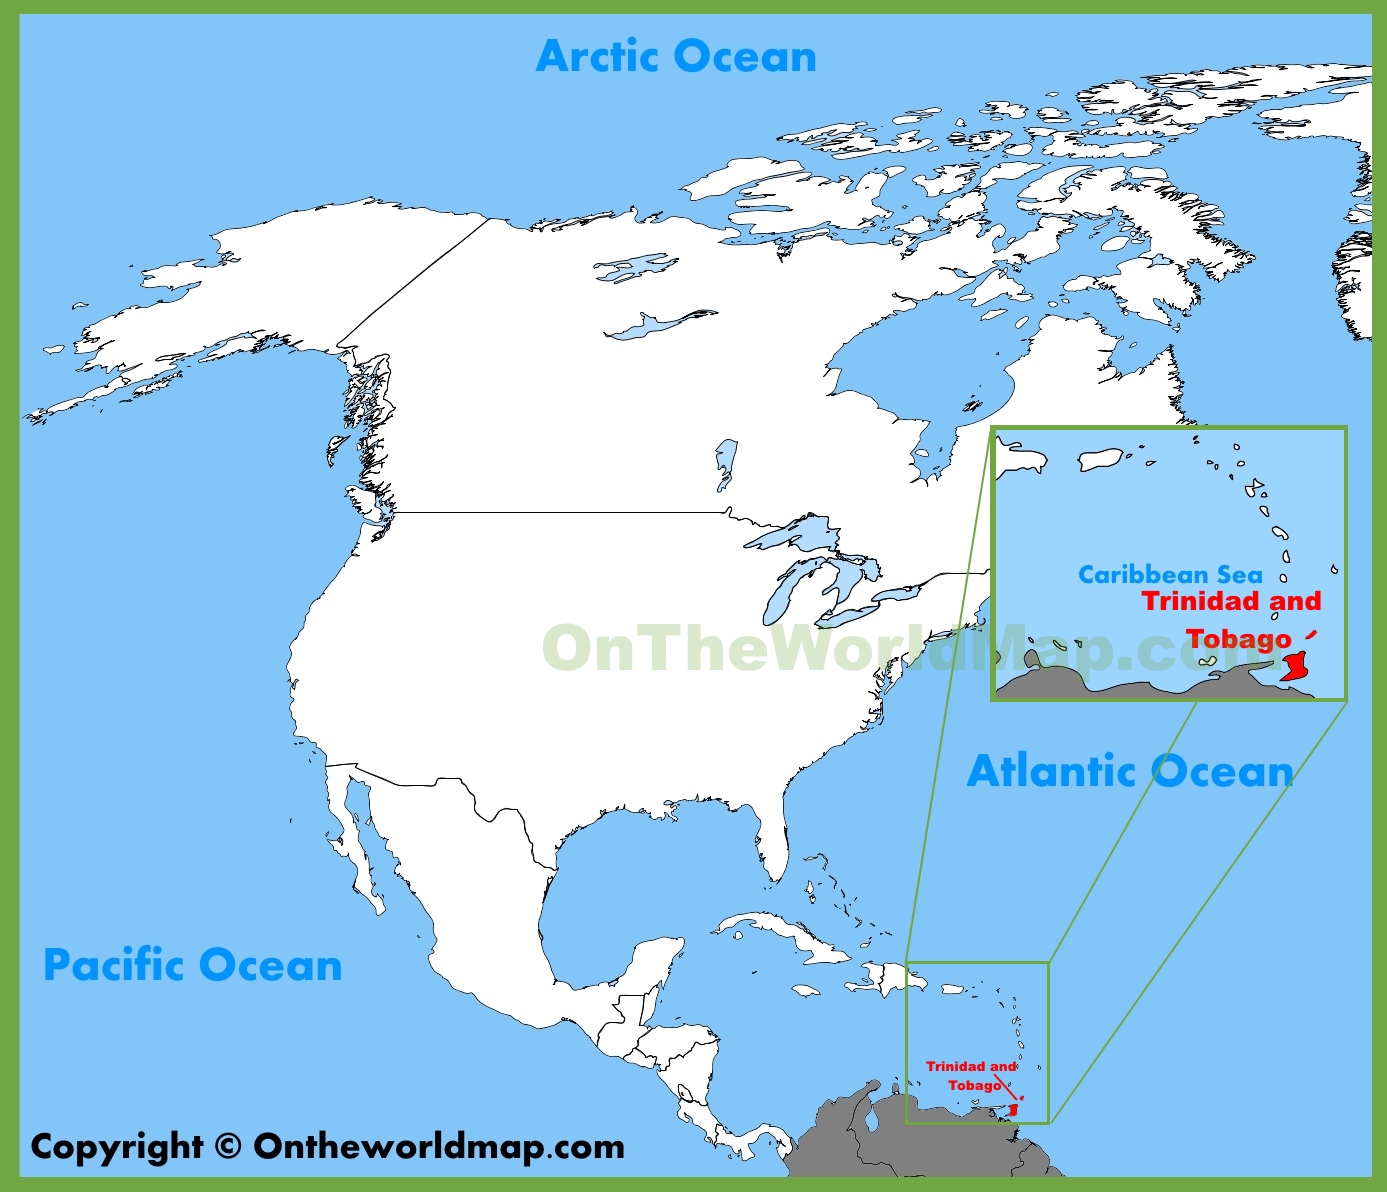 where is trinidad and tobago located on the world map Trinidad And Tobago Location On The North America Map where is trinidad and tobago located on the world map